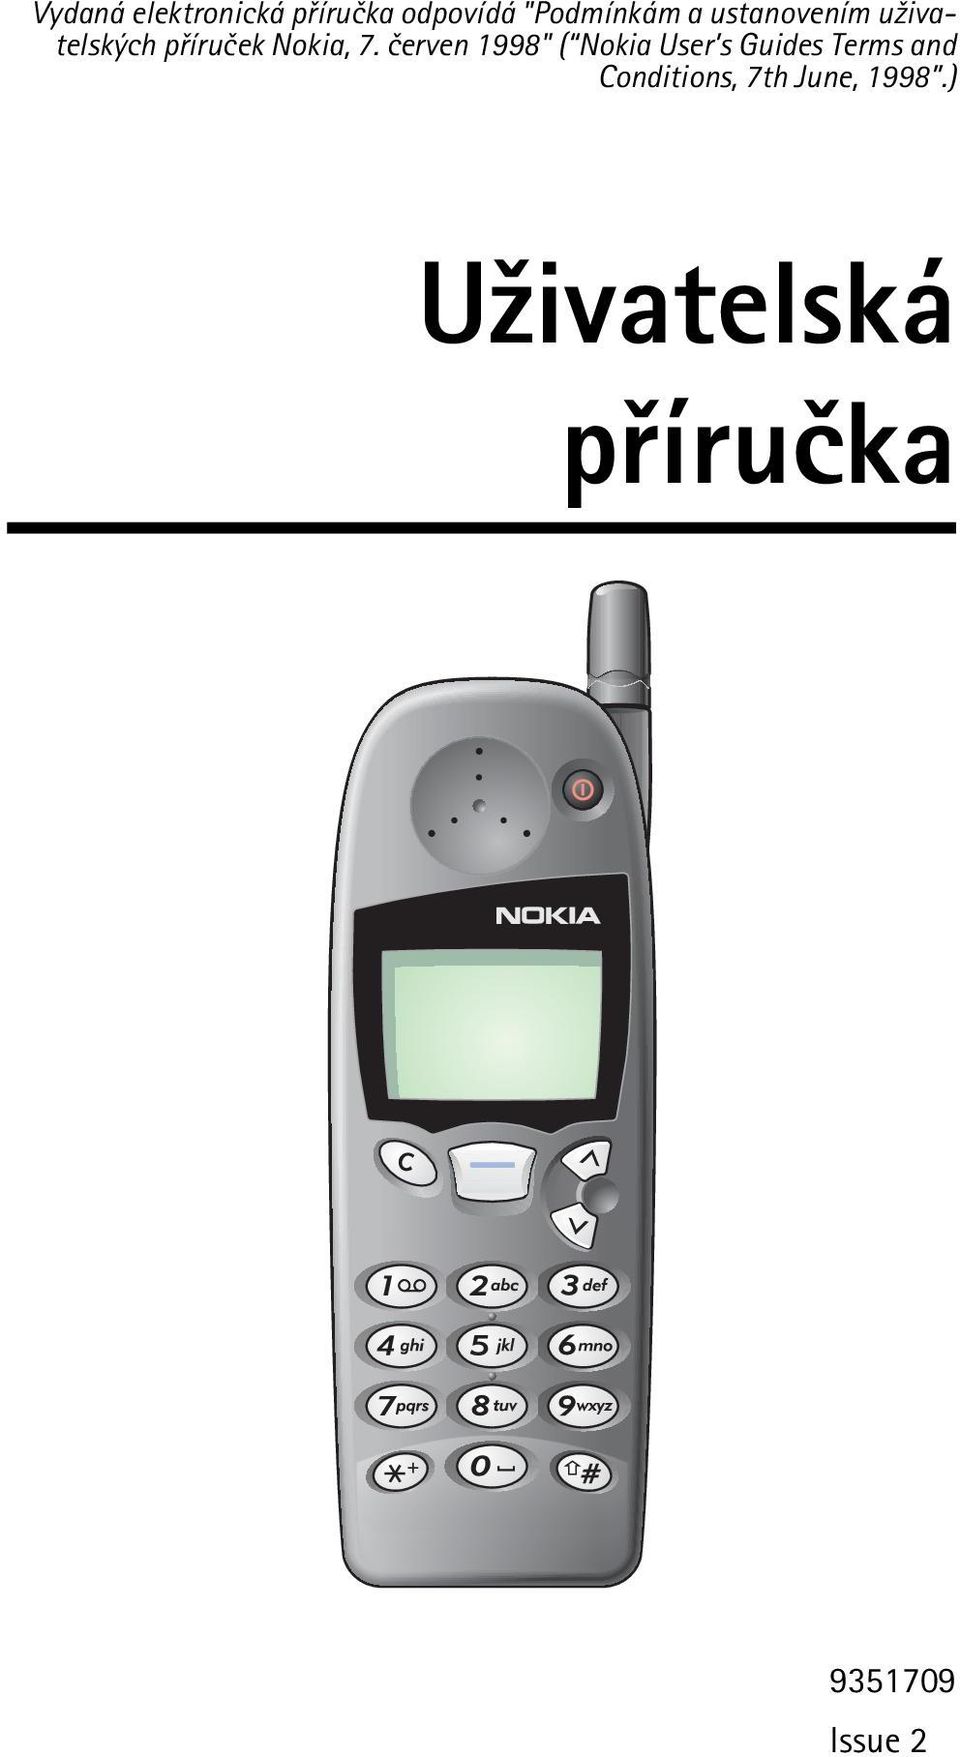 èerven 1998" ( Nokia User s Guides Terms and